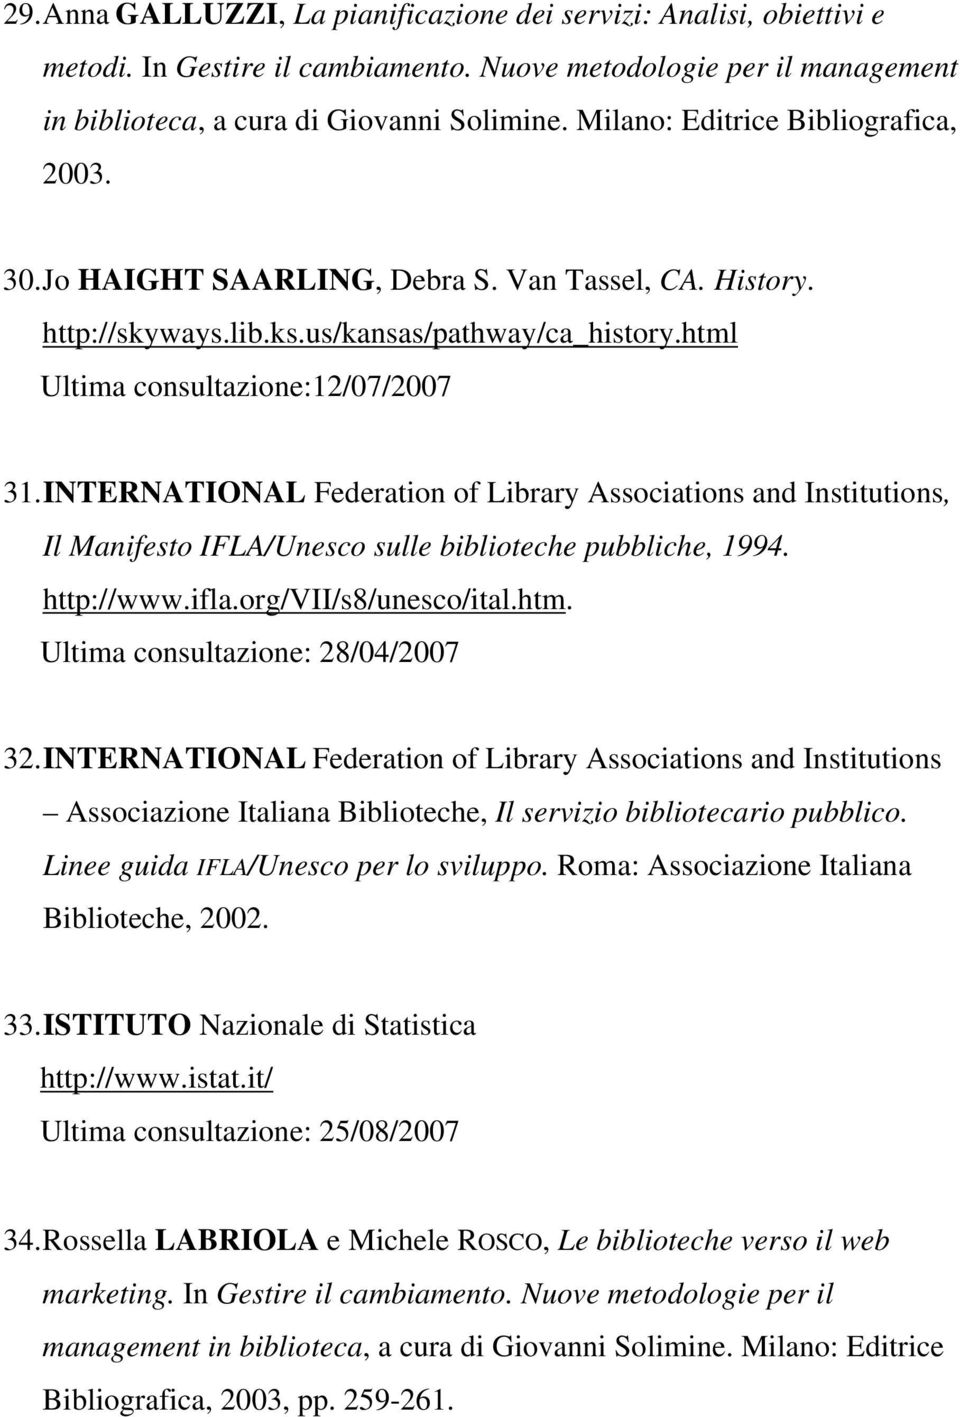 INTERNATIONAL Federation of Library Associations and Institutions, Il Manifesto IFLA/Unesco sulle biblioteche pubbliche, 1994. http://www.ifla.org/vii/s8/unesco/ital.htm.